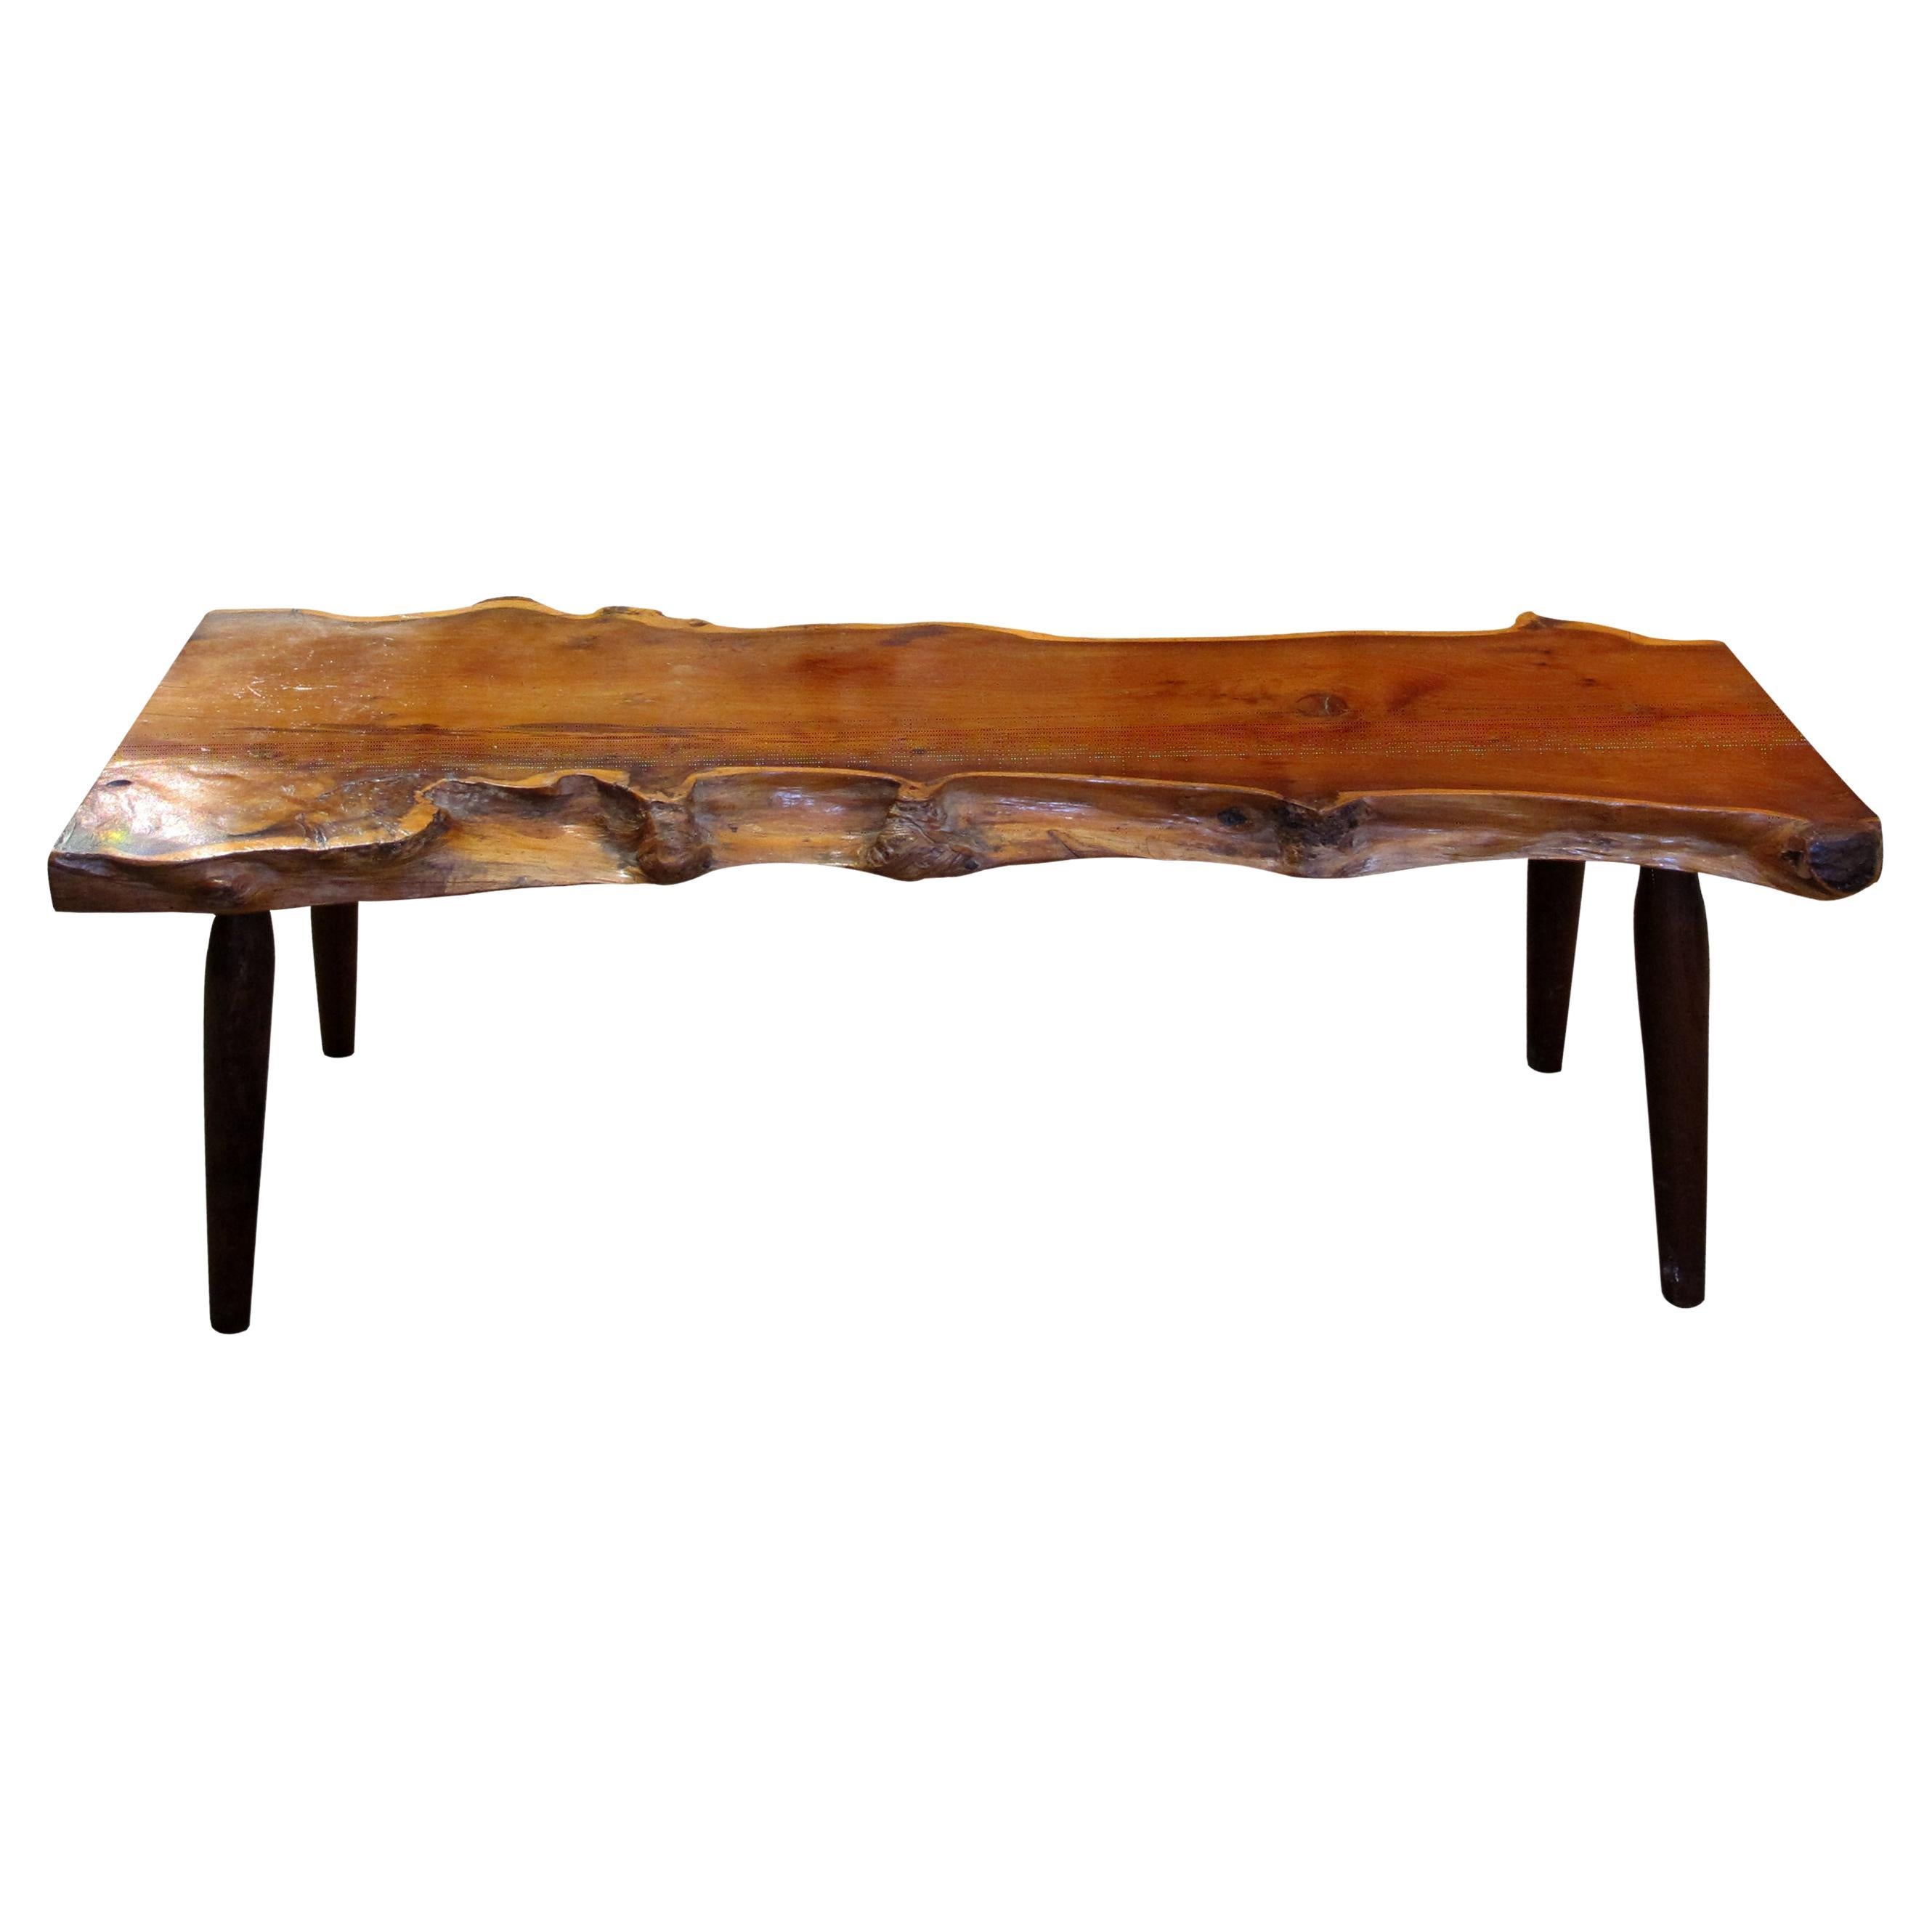 1960s Live Edge Yew Wood Bench Attributed to Reynolds Of Ludlow, English For Sale